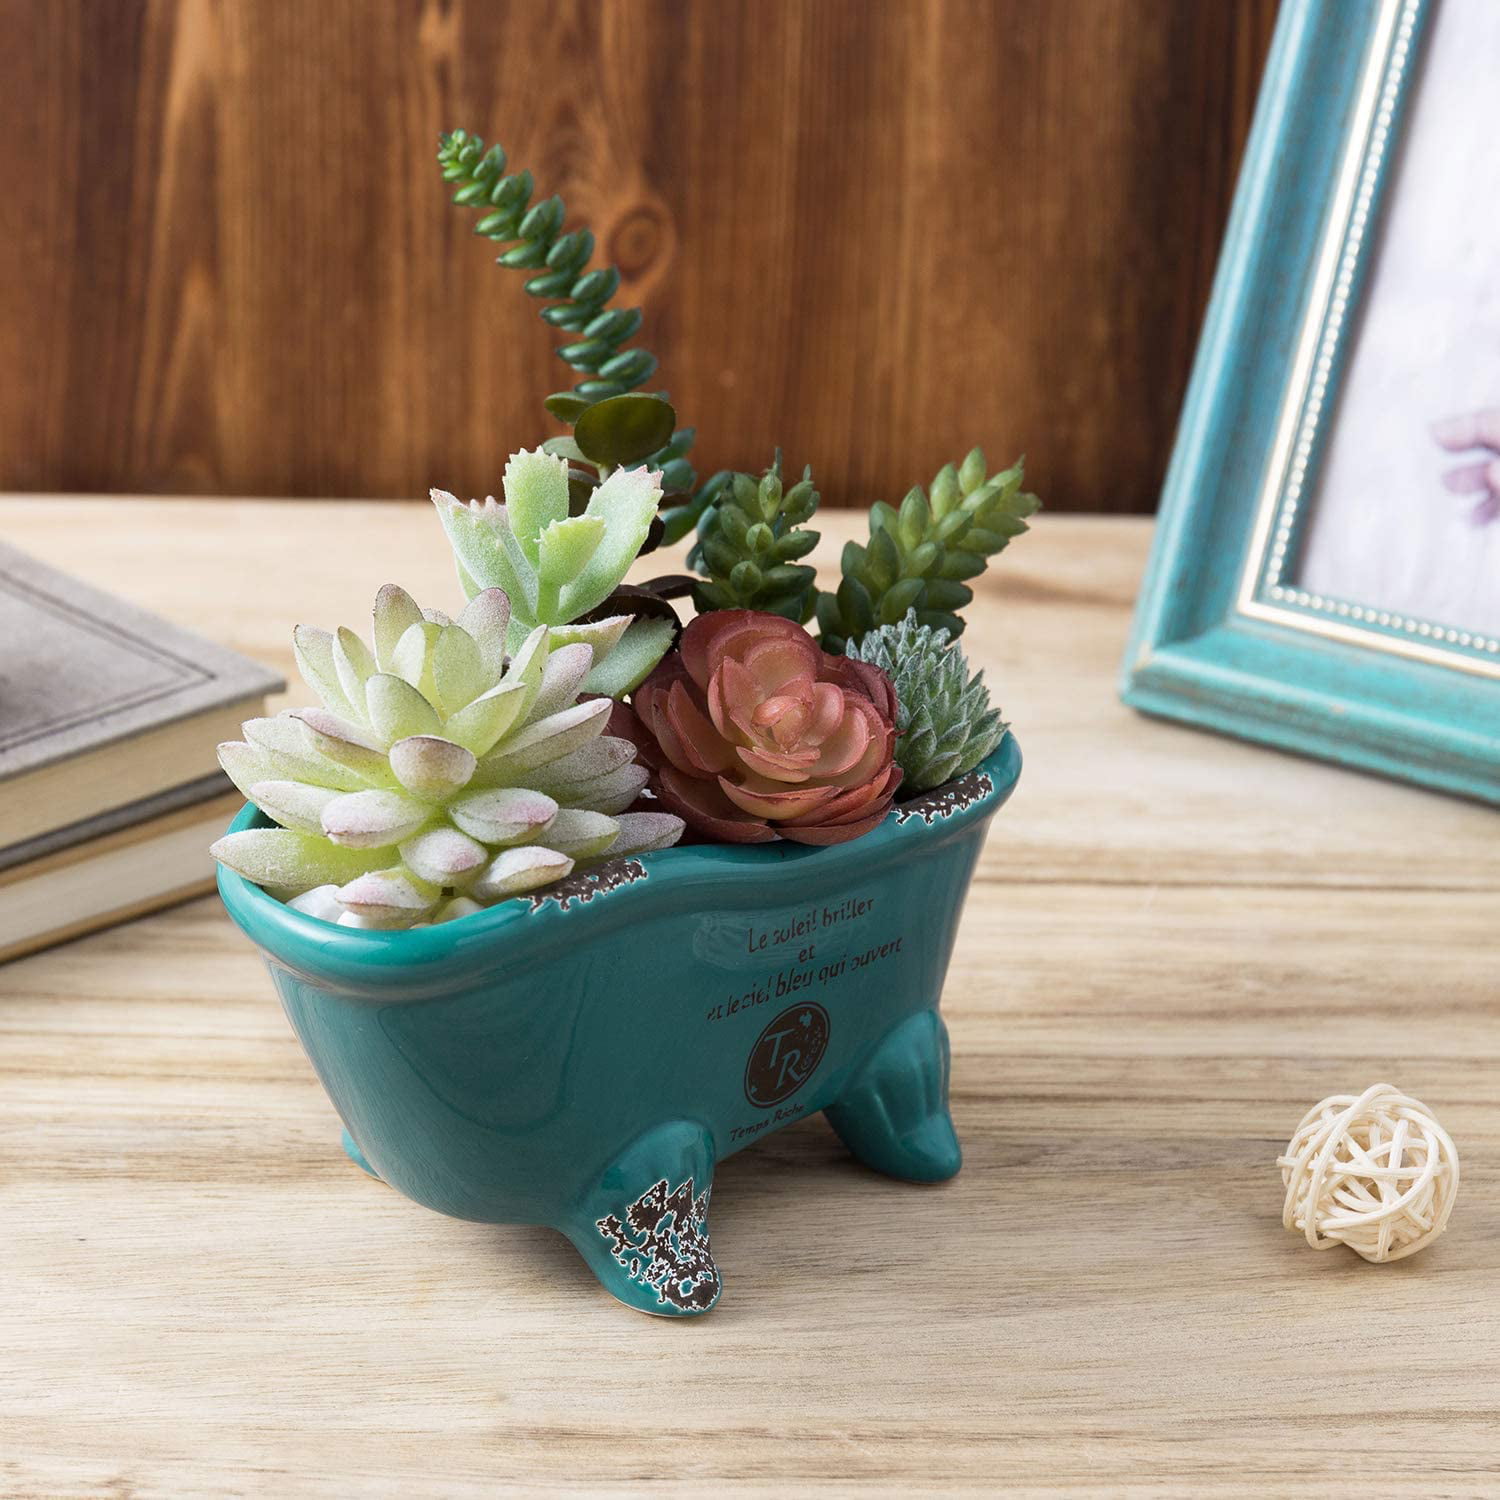 MyGift 6 Inch Turquoise Porcelain French Claw Foot Bathtub Planter Pot Soap Dish 